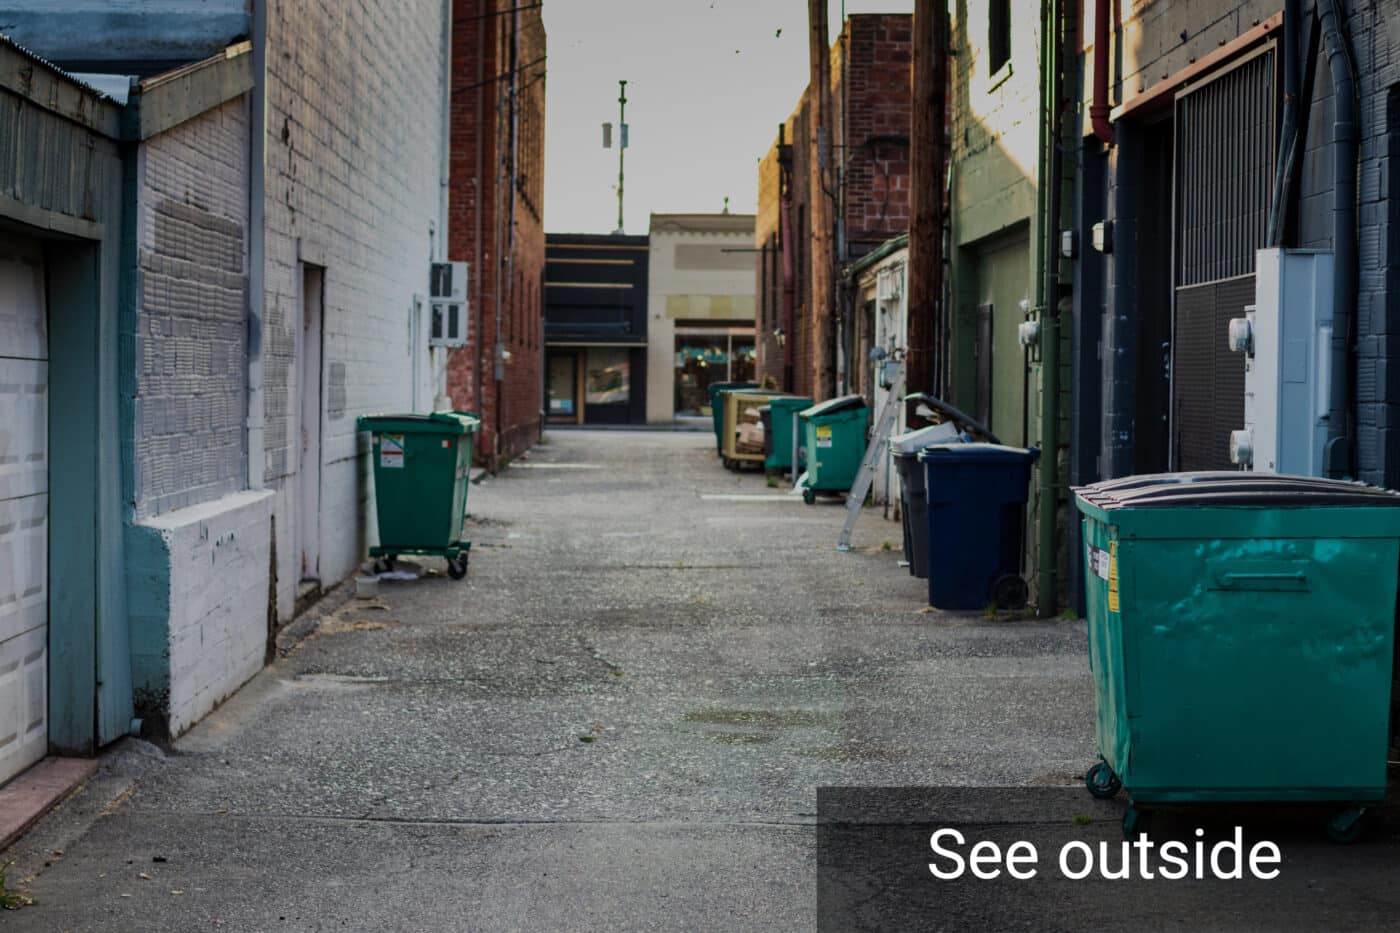 Ugly Street View Image of a back alley with "See Outside" link